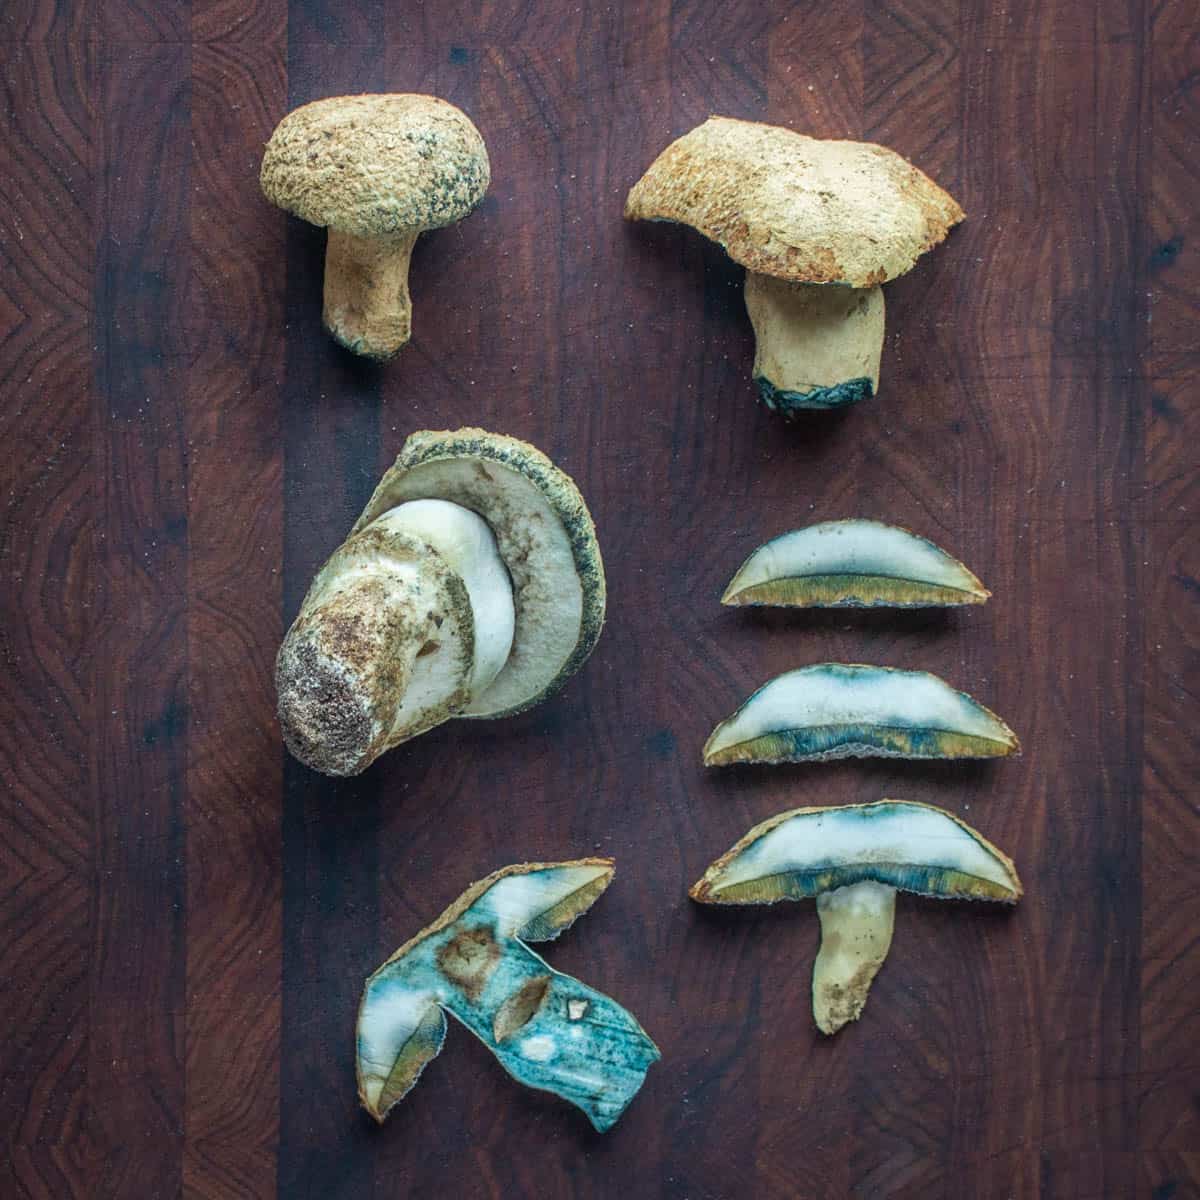 Blue stained mushrooms cut and laid out for identification on a board.